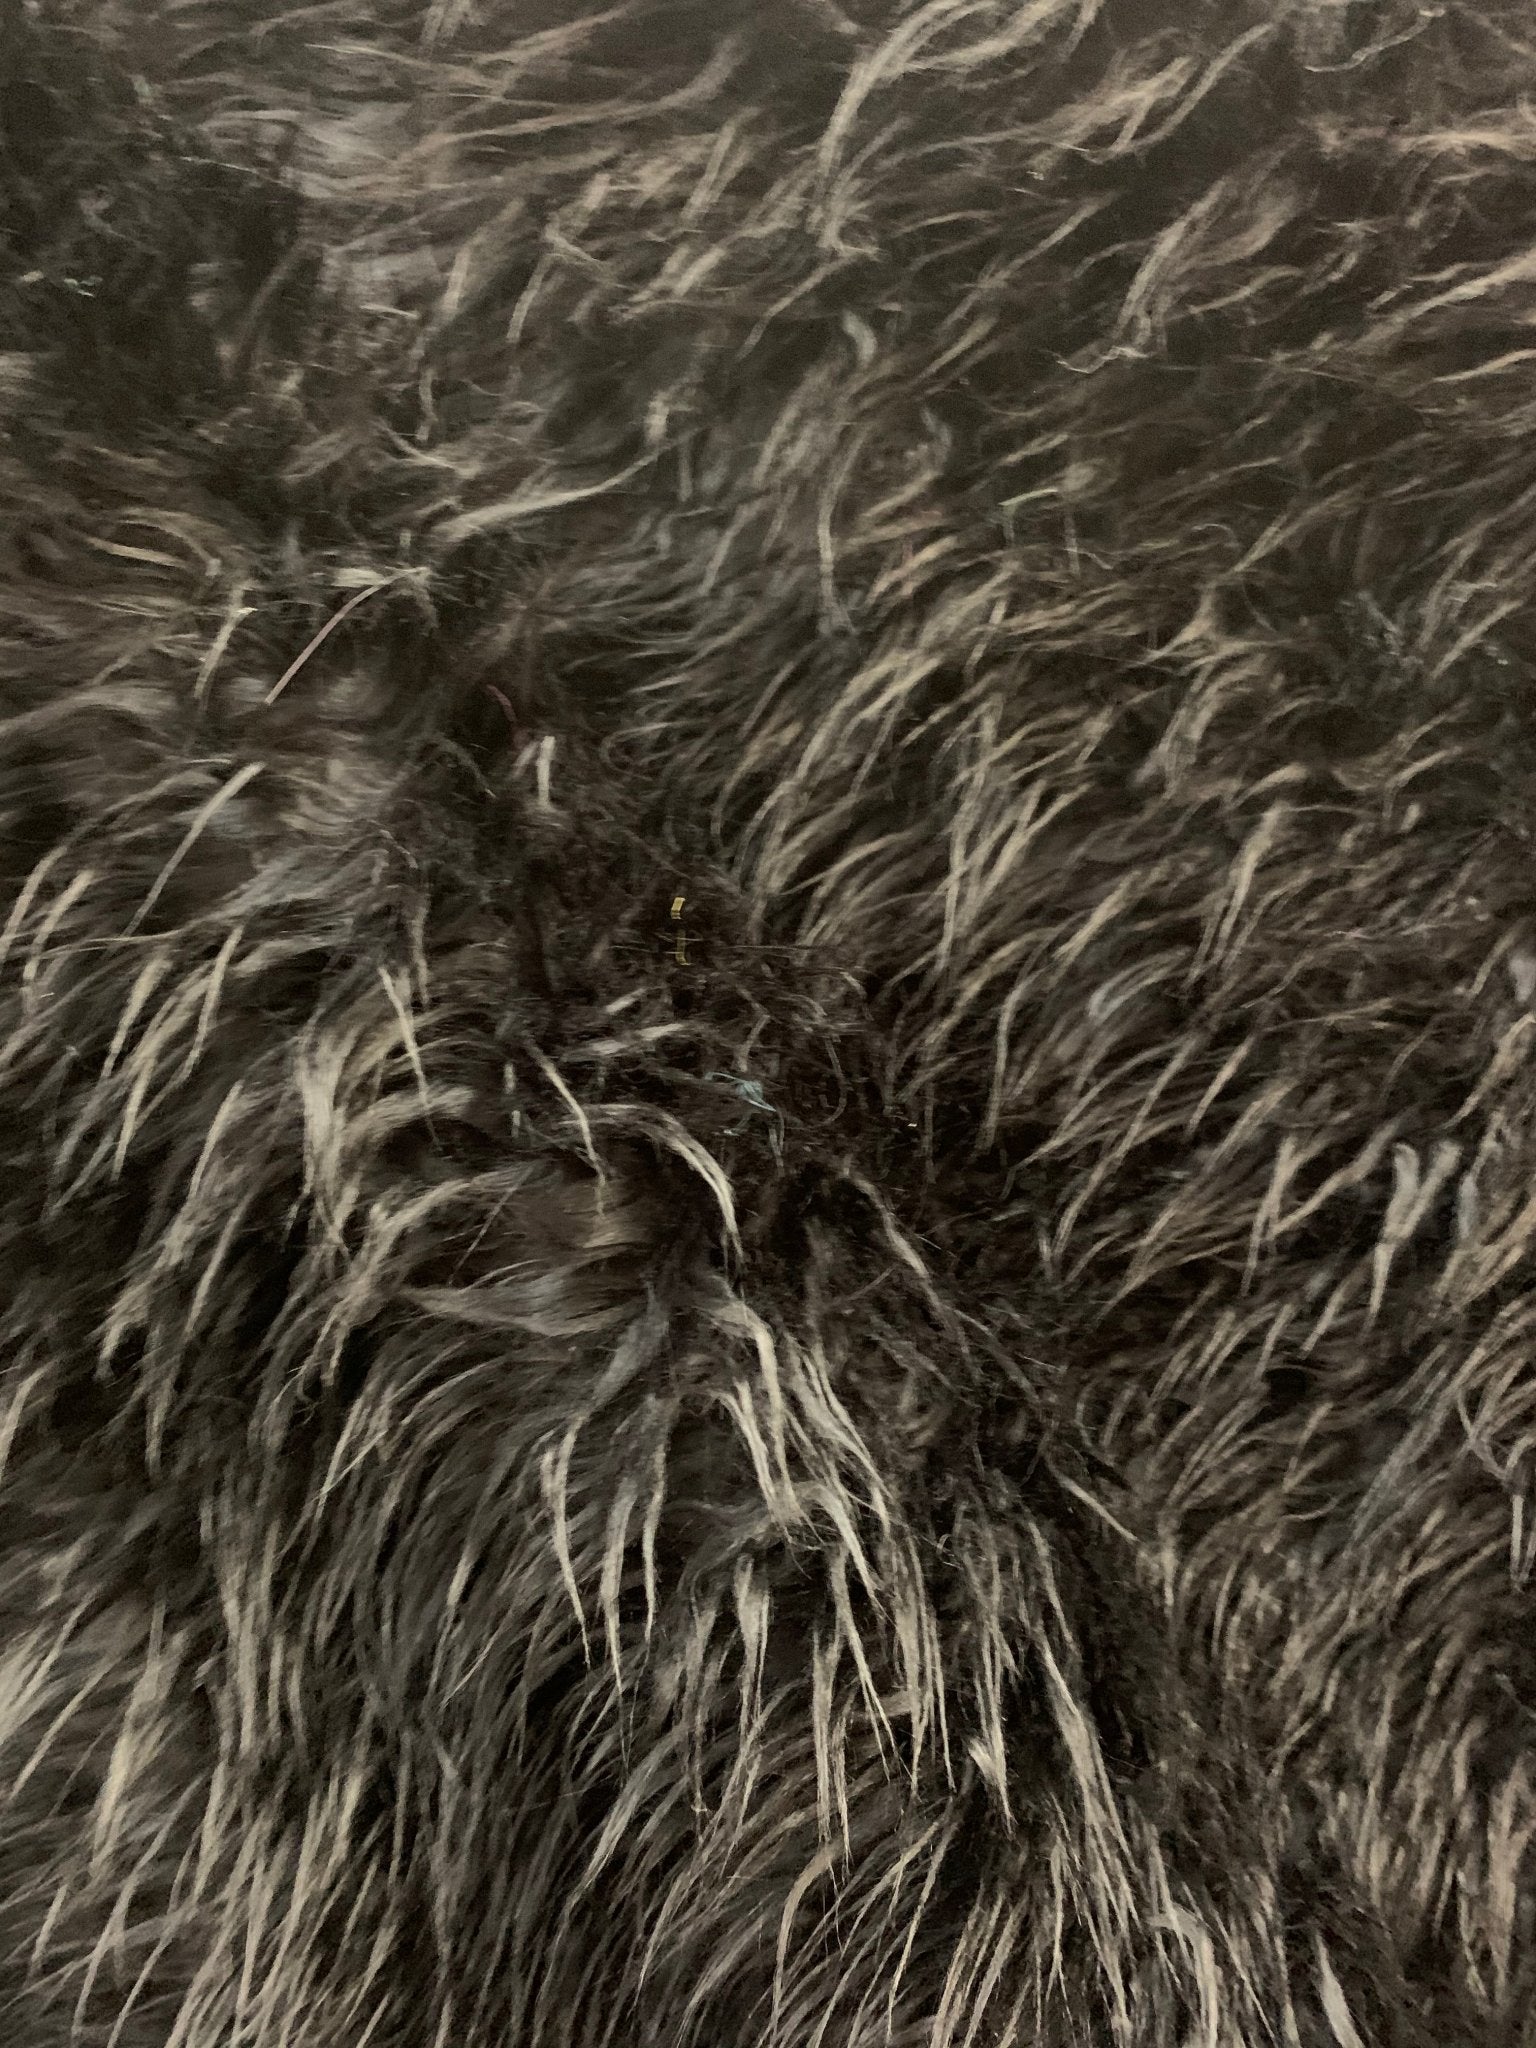 Mongolian Long Pile Fake Faux Fur Fabric Sold By The YardICEFABRICICE FABRICSBlackBy The Yard (60 inches Wide)Mongolian Long Pile Fake Faux Fur Fabric Sold By The Yard ICEFABRIC